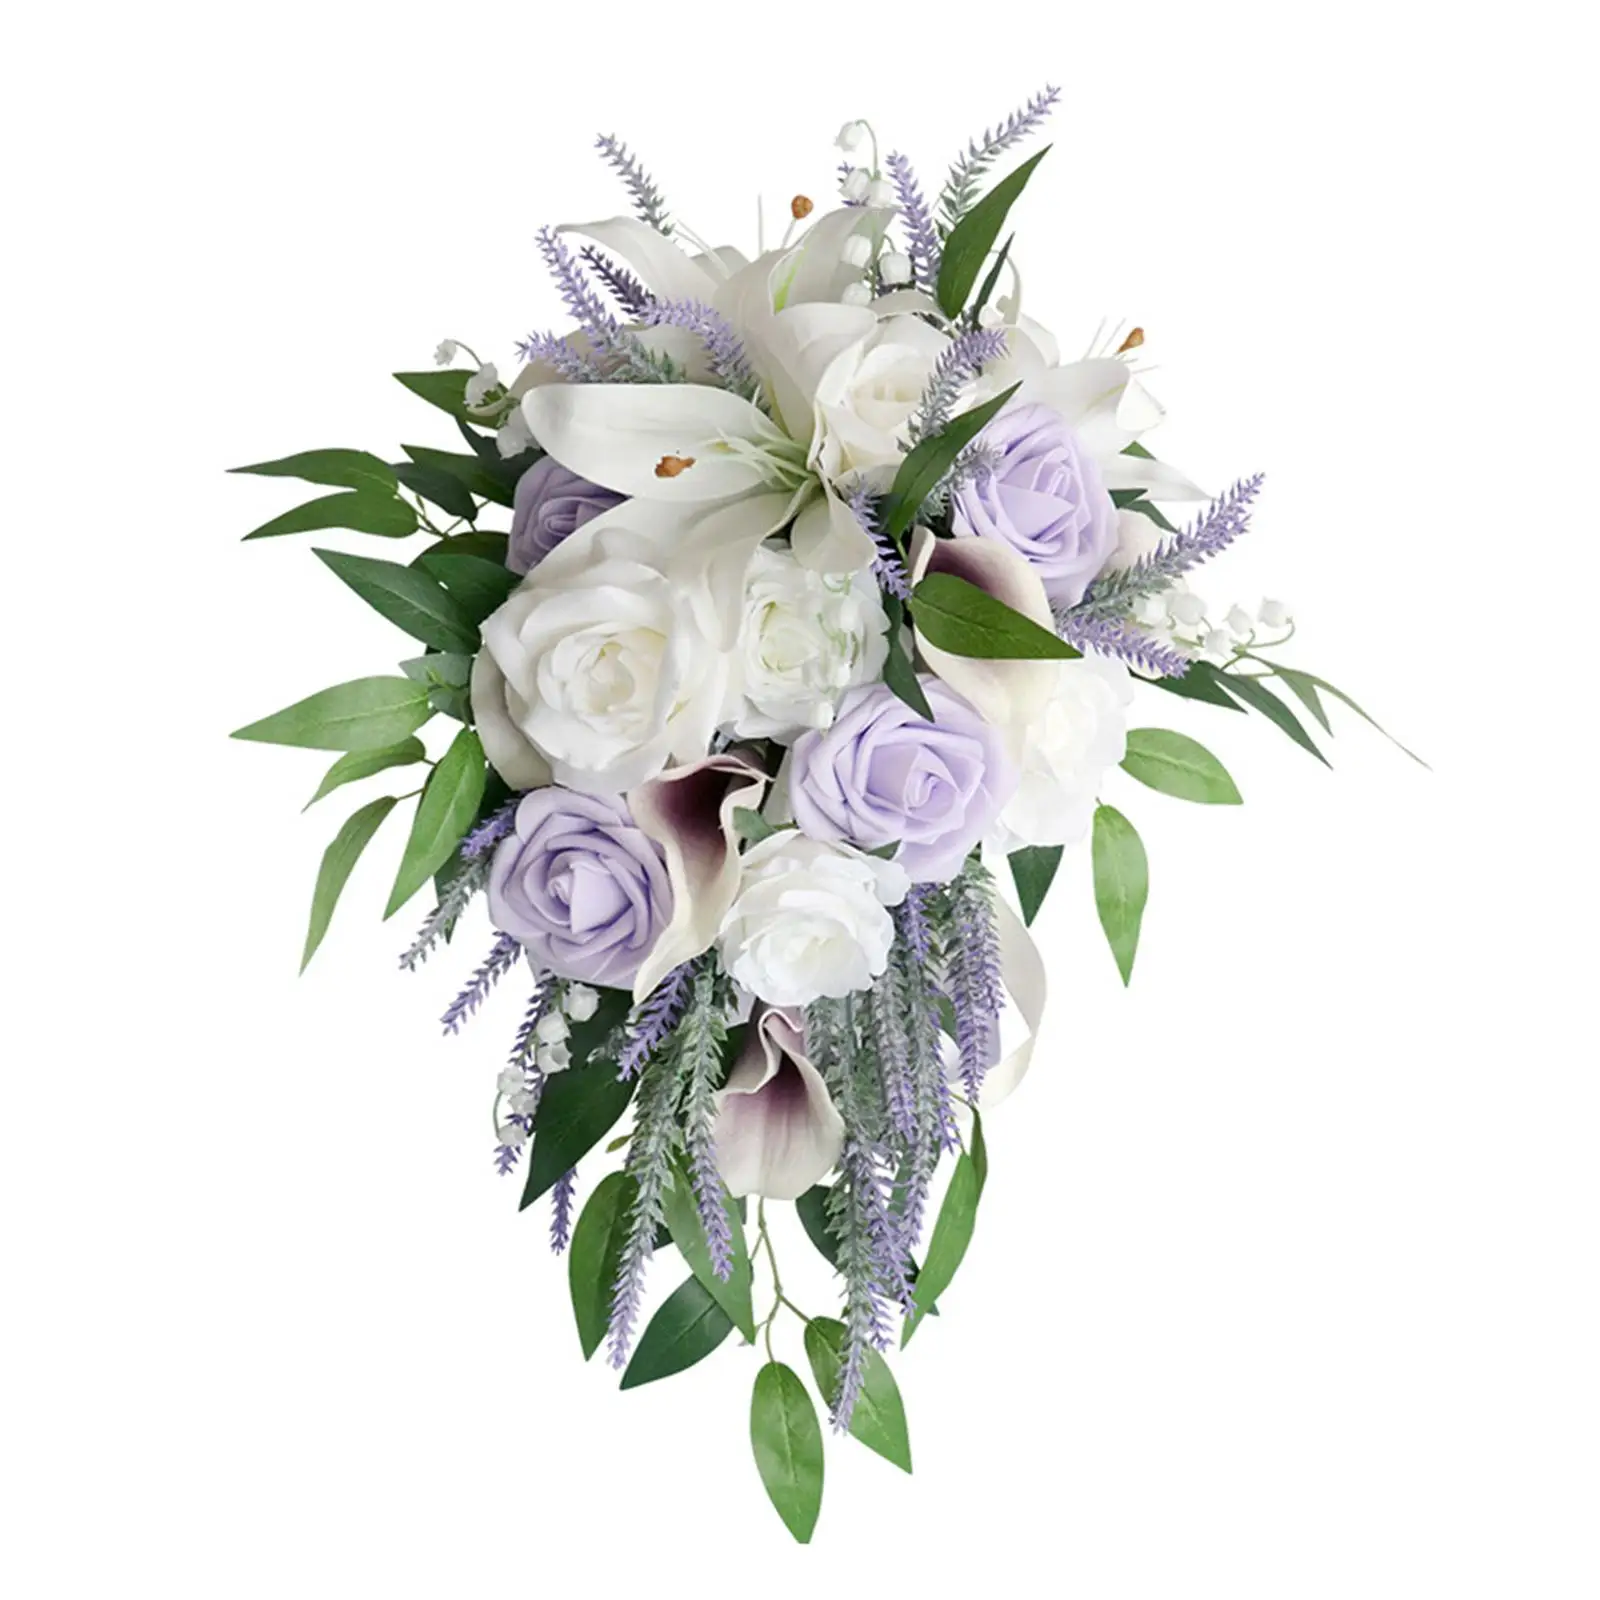 Handmade Wedding Bouquet Water Drop Style Decoration 26x45cm Artificial Flowers for Wedding Ceremony Festival Proposal Church